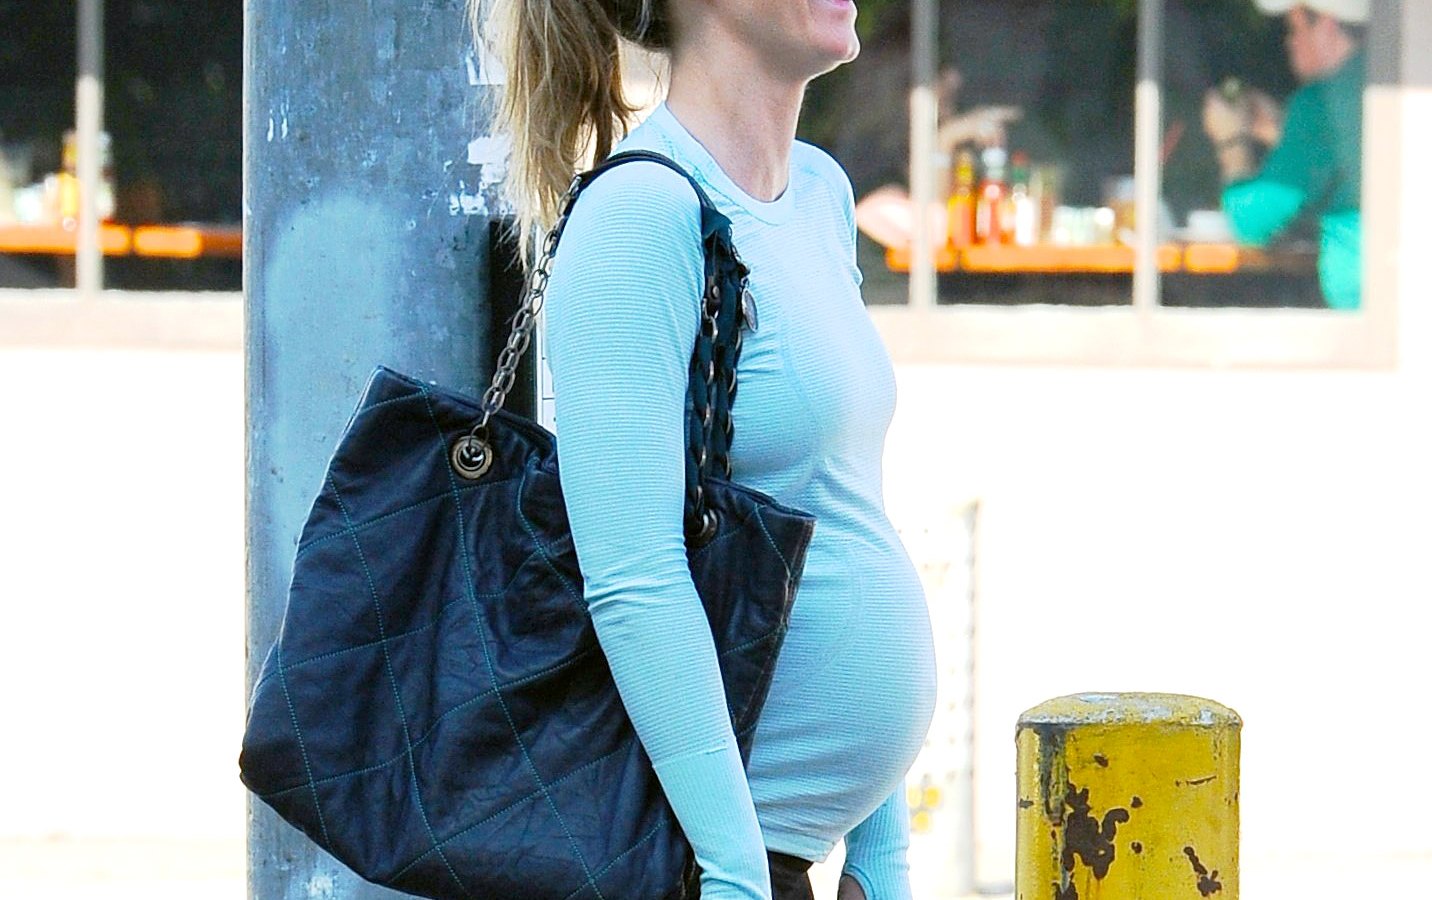 Emily Blunt shows off her growing baby bump as she goes to Hugo's